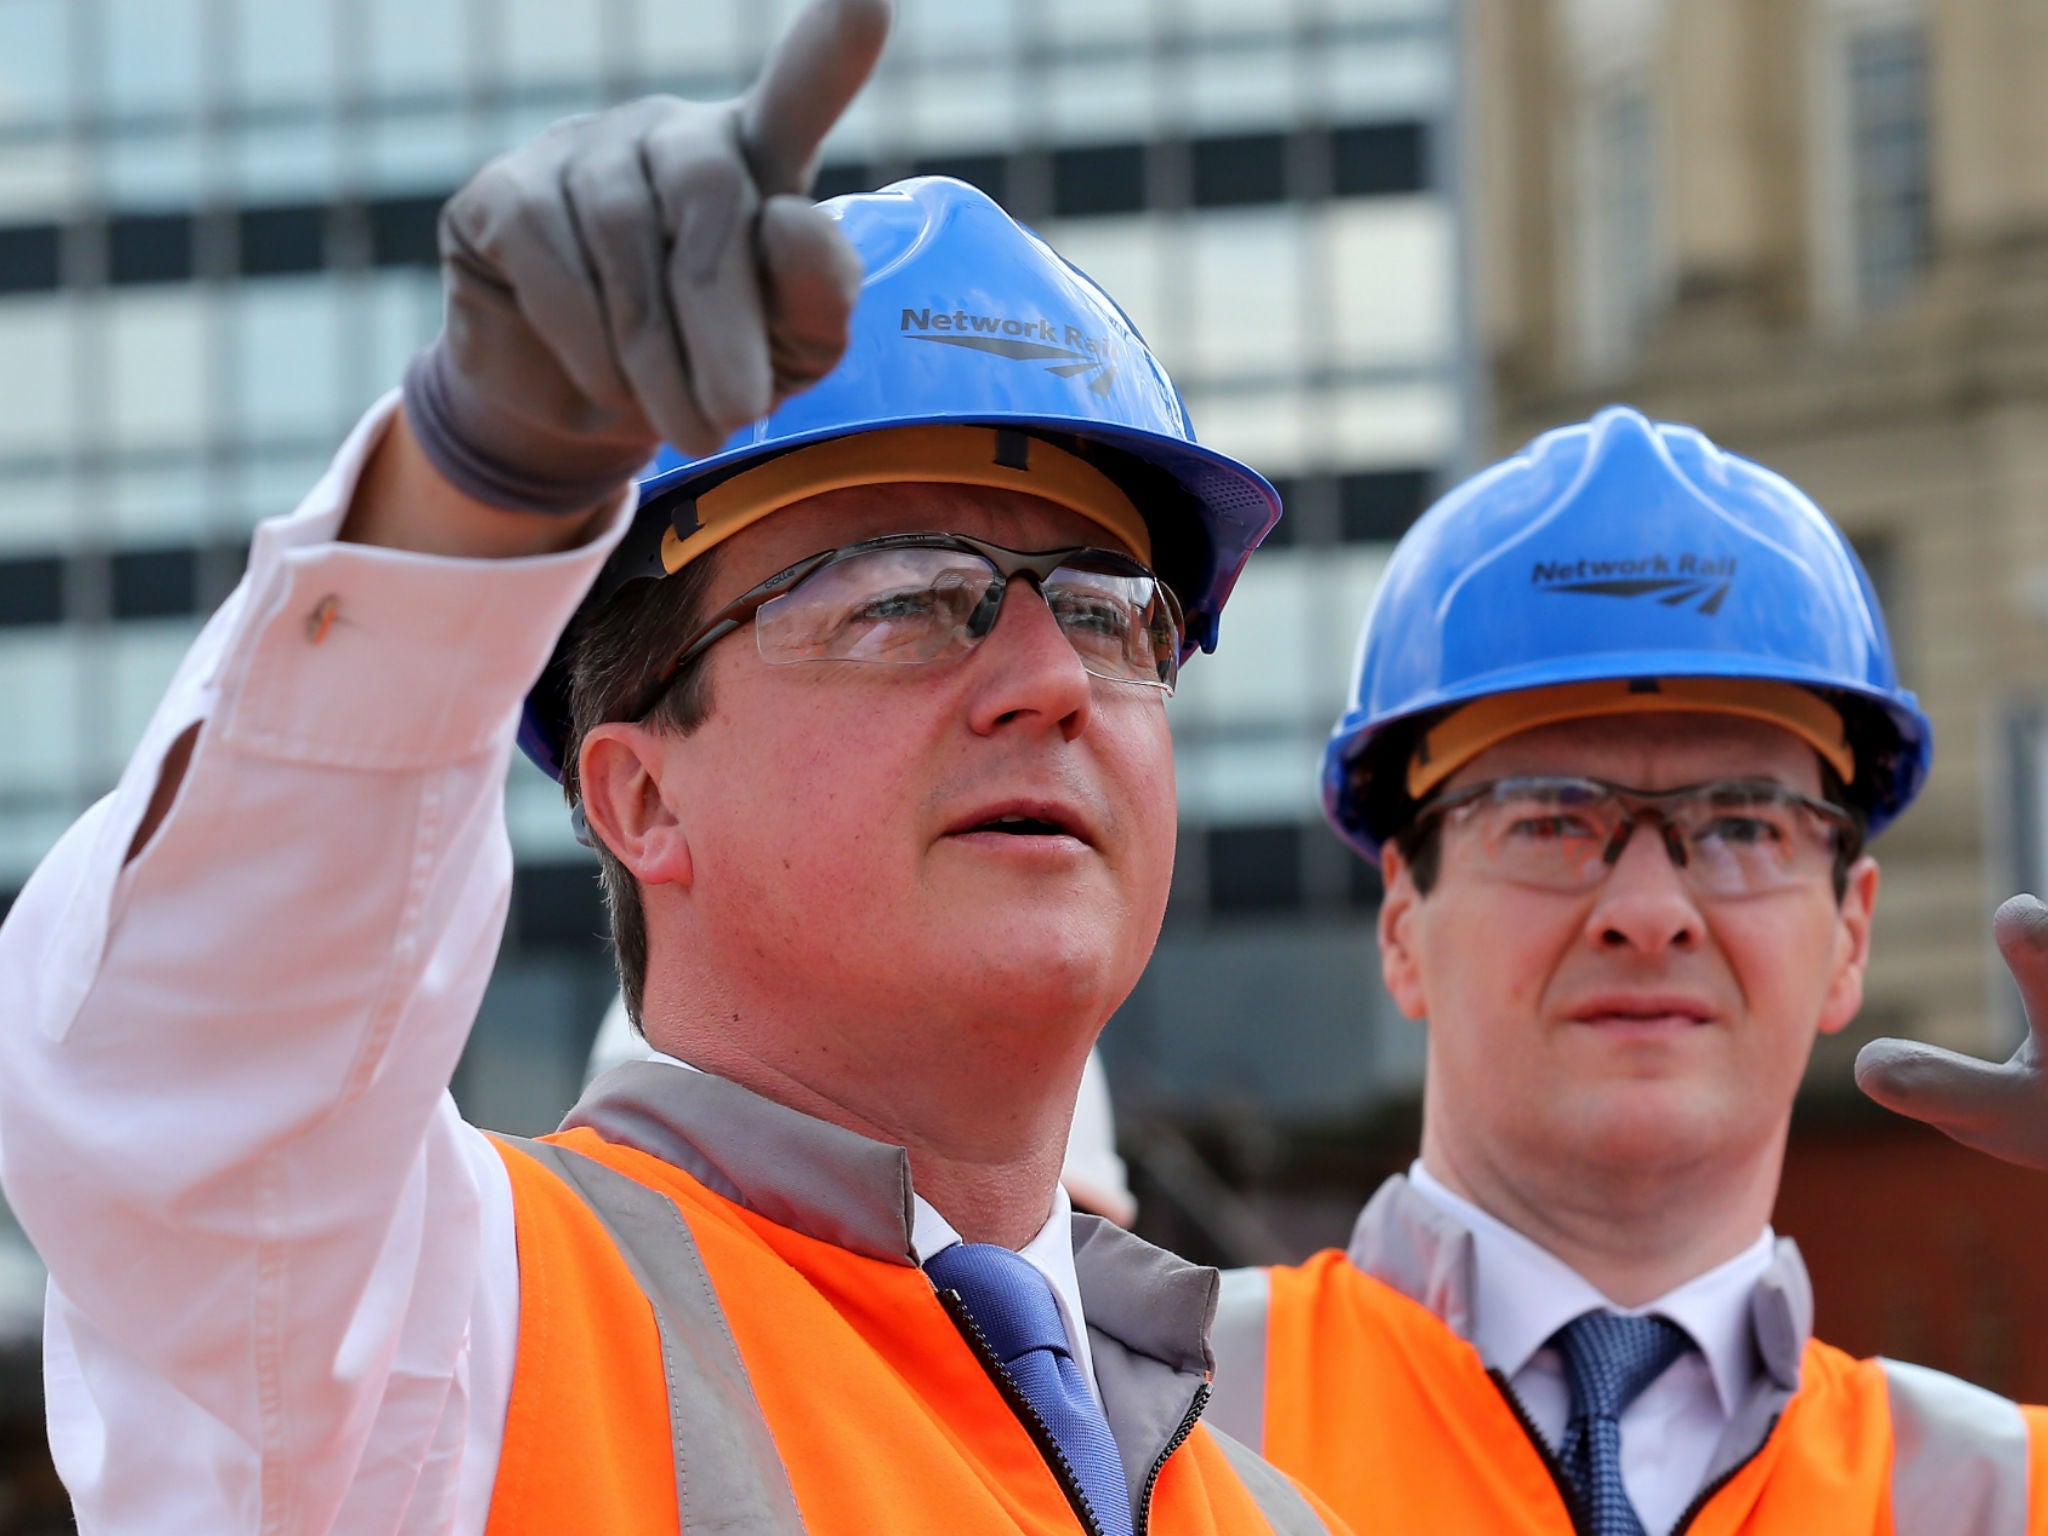 David Cameron and George Osborne visit Victoria station in Manchester in 2014